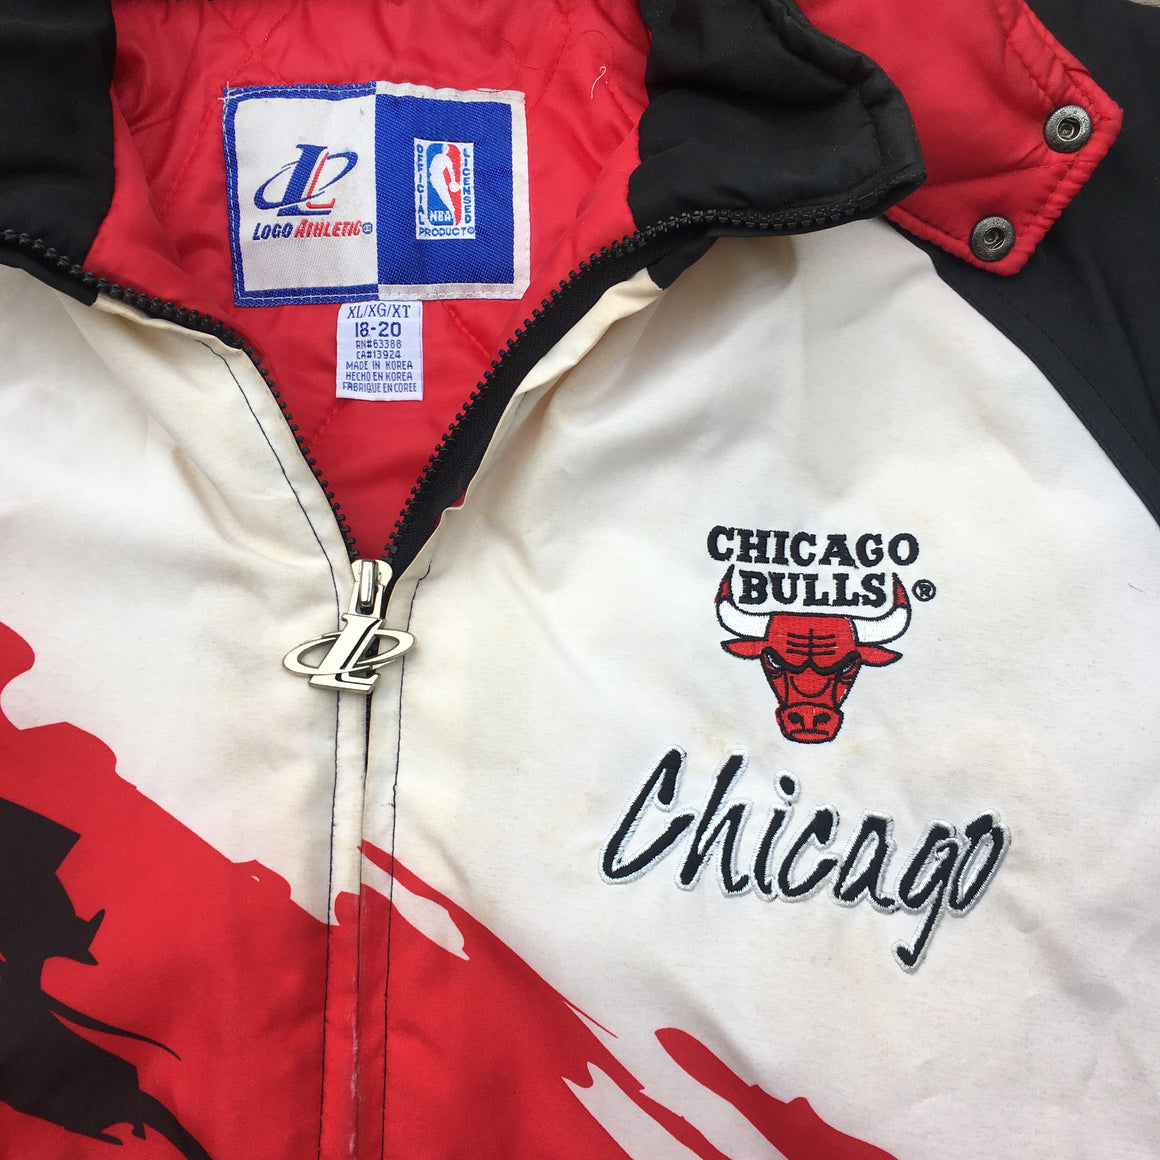 Chicago Bulls puffer jacket - Youth XL / Adult S-M